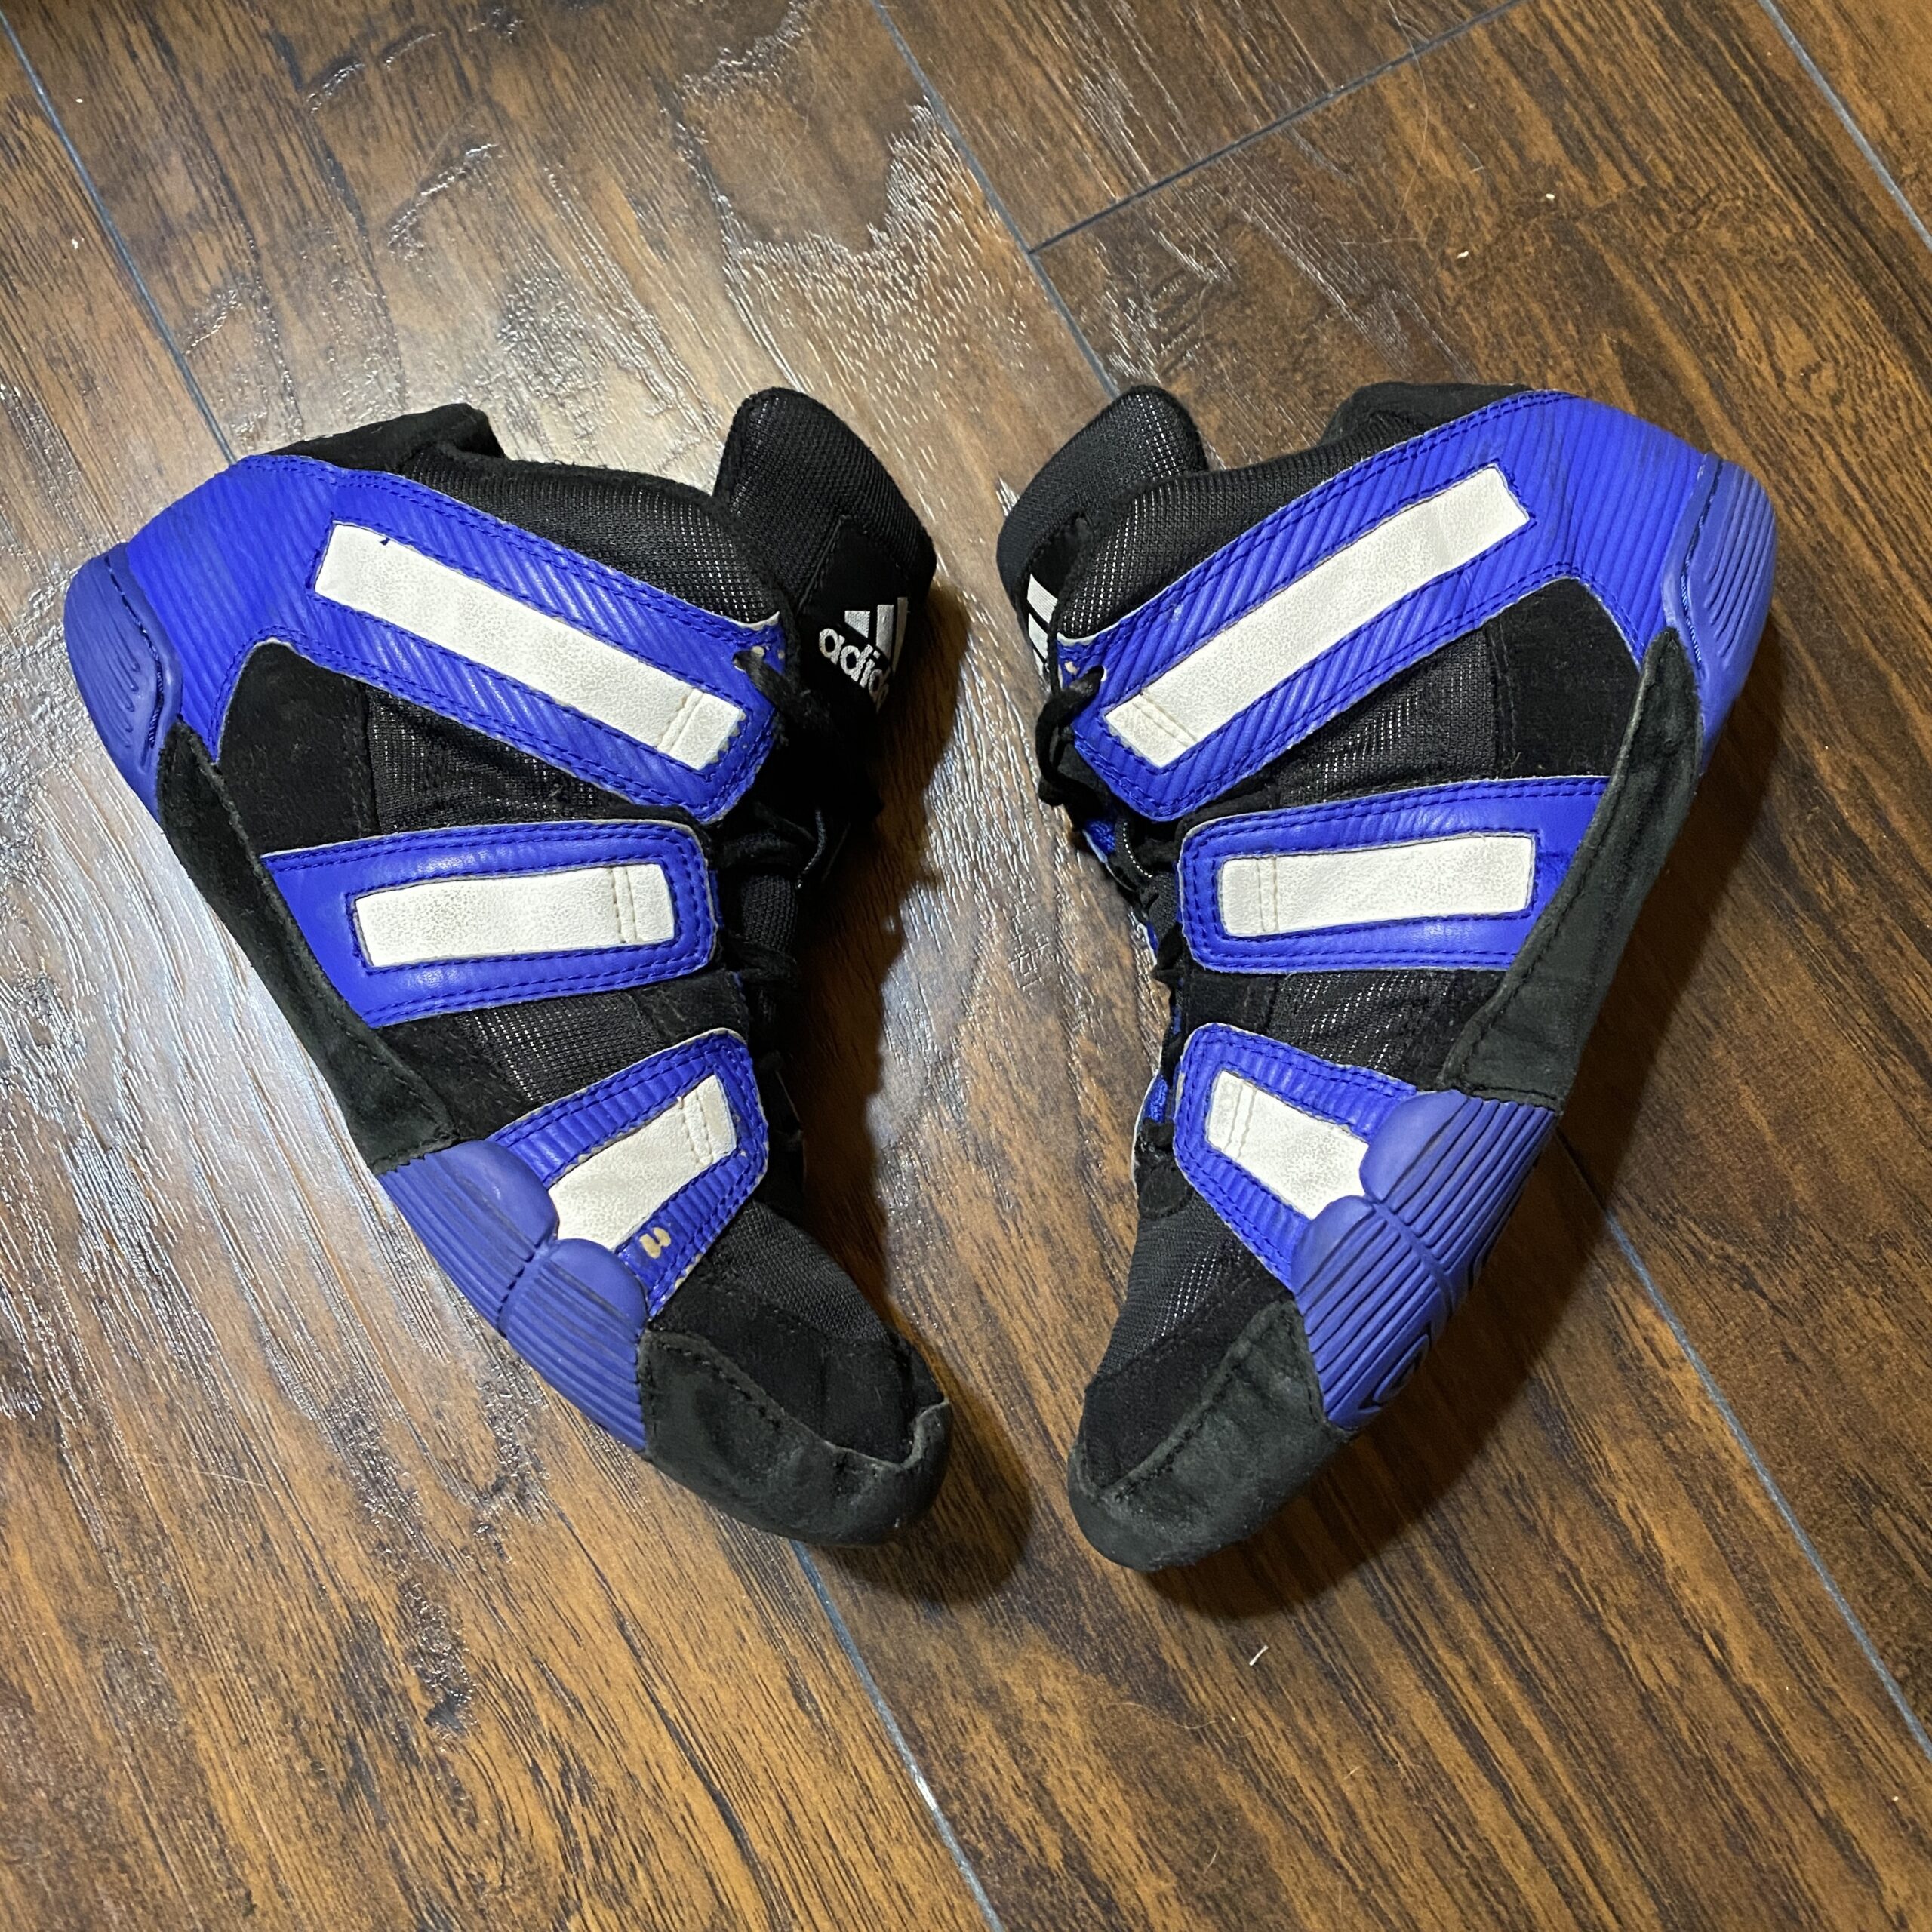 Wrestling Shoes Buying Guide